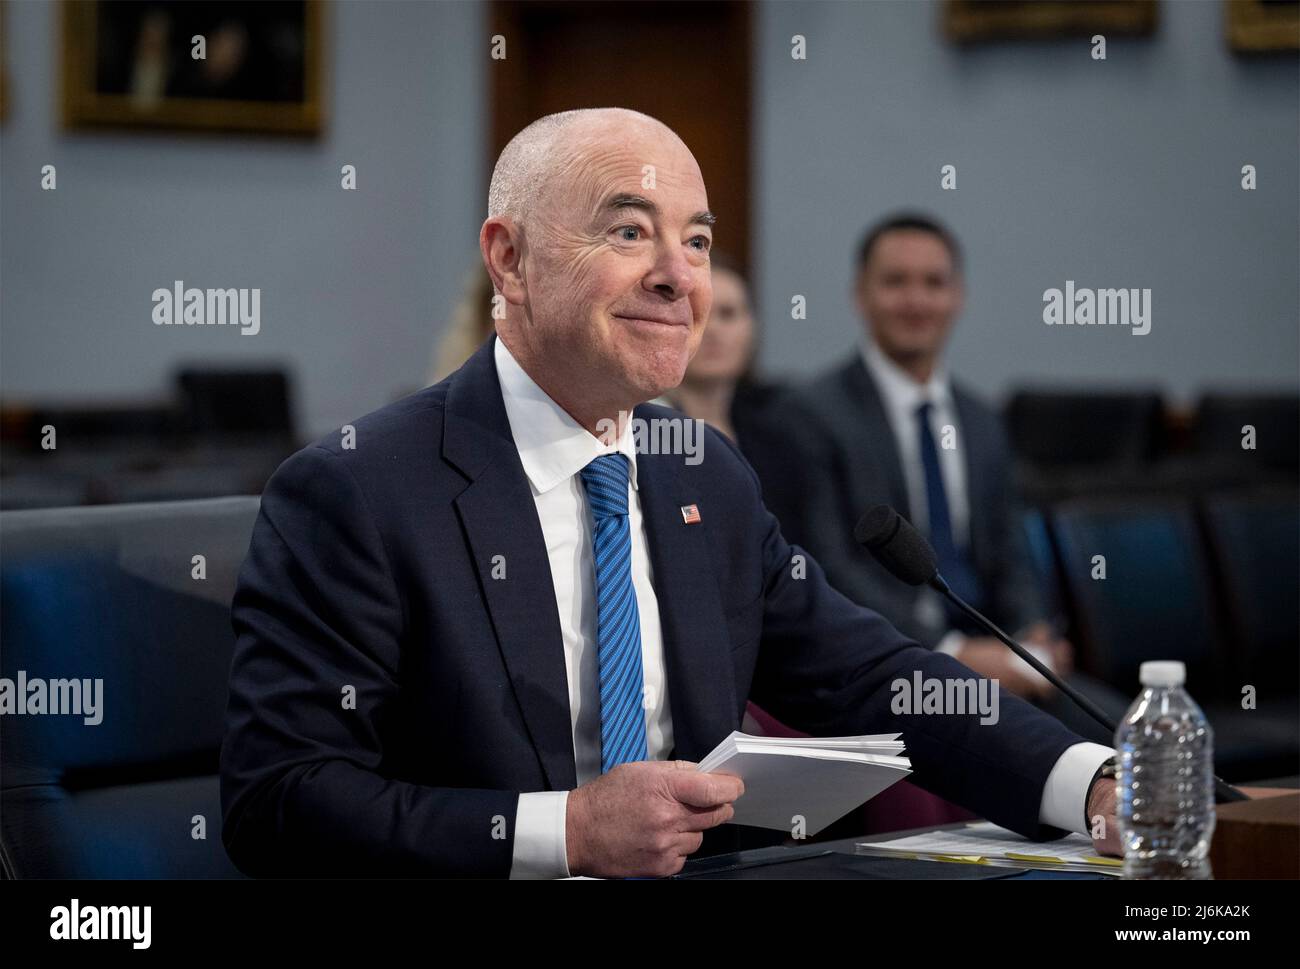 Washington, United States of America. 27 April, 2022. U.S Homeland Security Secretary Alejandro Mayorkas settles in before testifying at the House Committee on Appropriations, on Capitol Hill April 28, 2022 in Washington, D.C.  Credit: Benjamin Applebaum/DHS Photo/Alamy Live News Stock Photo